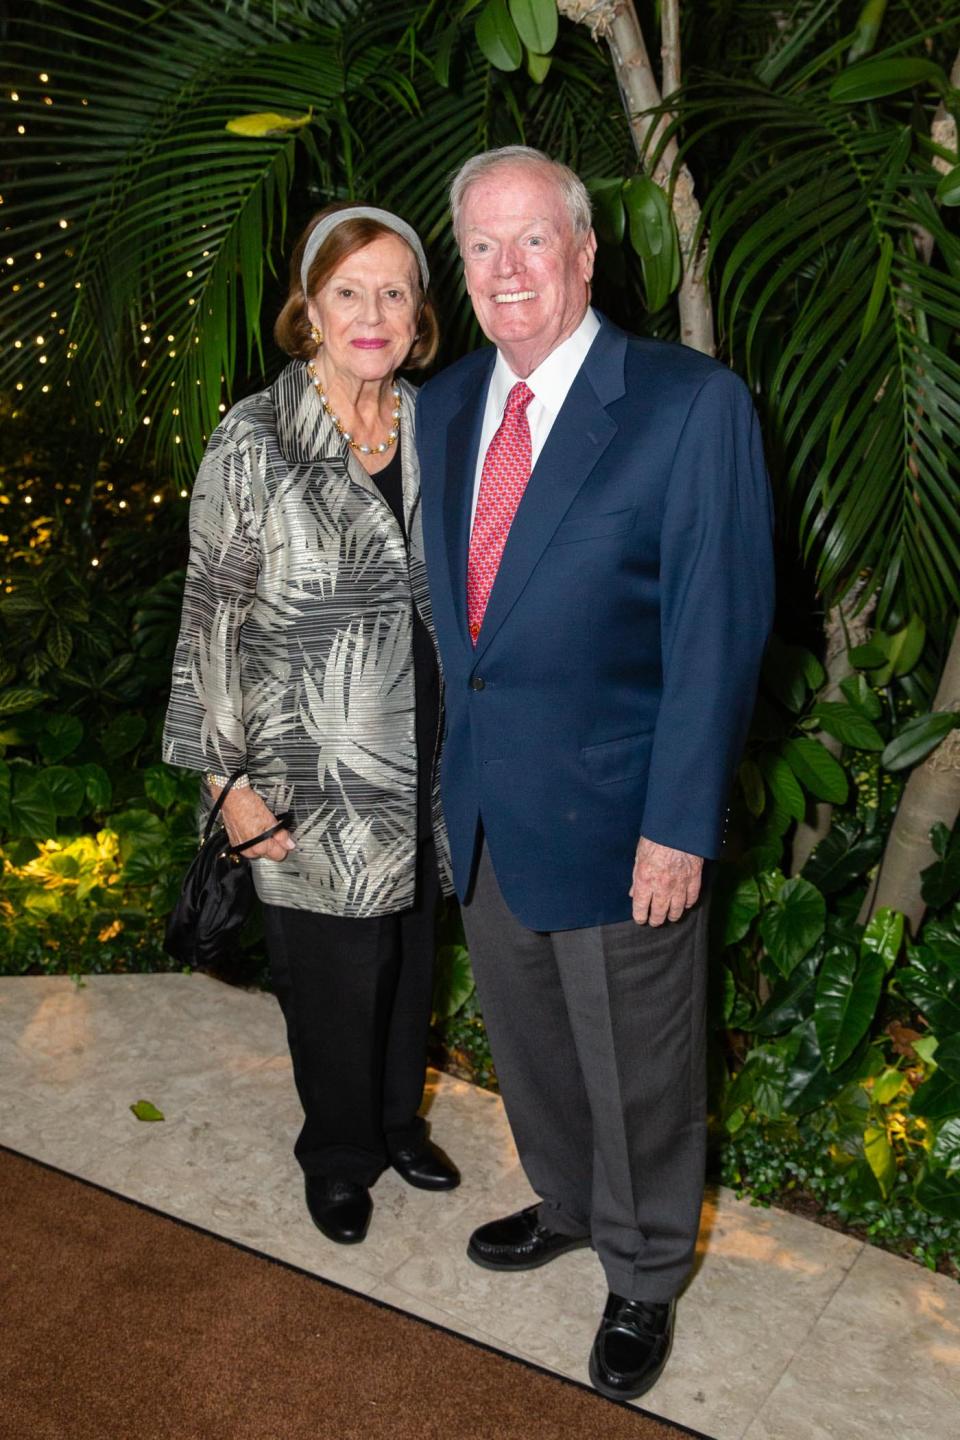 Heather and Patrick Henry at the 2022 Soiree to benefit the Rehabilitation Center for Children and Adults. This year's event takes place tonight at Club Colette.